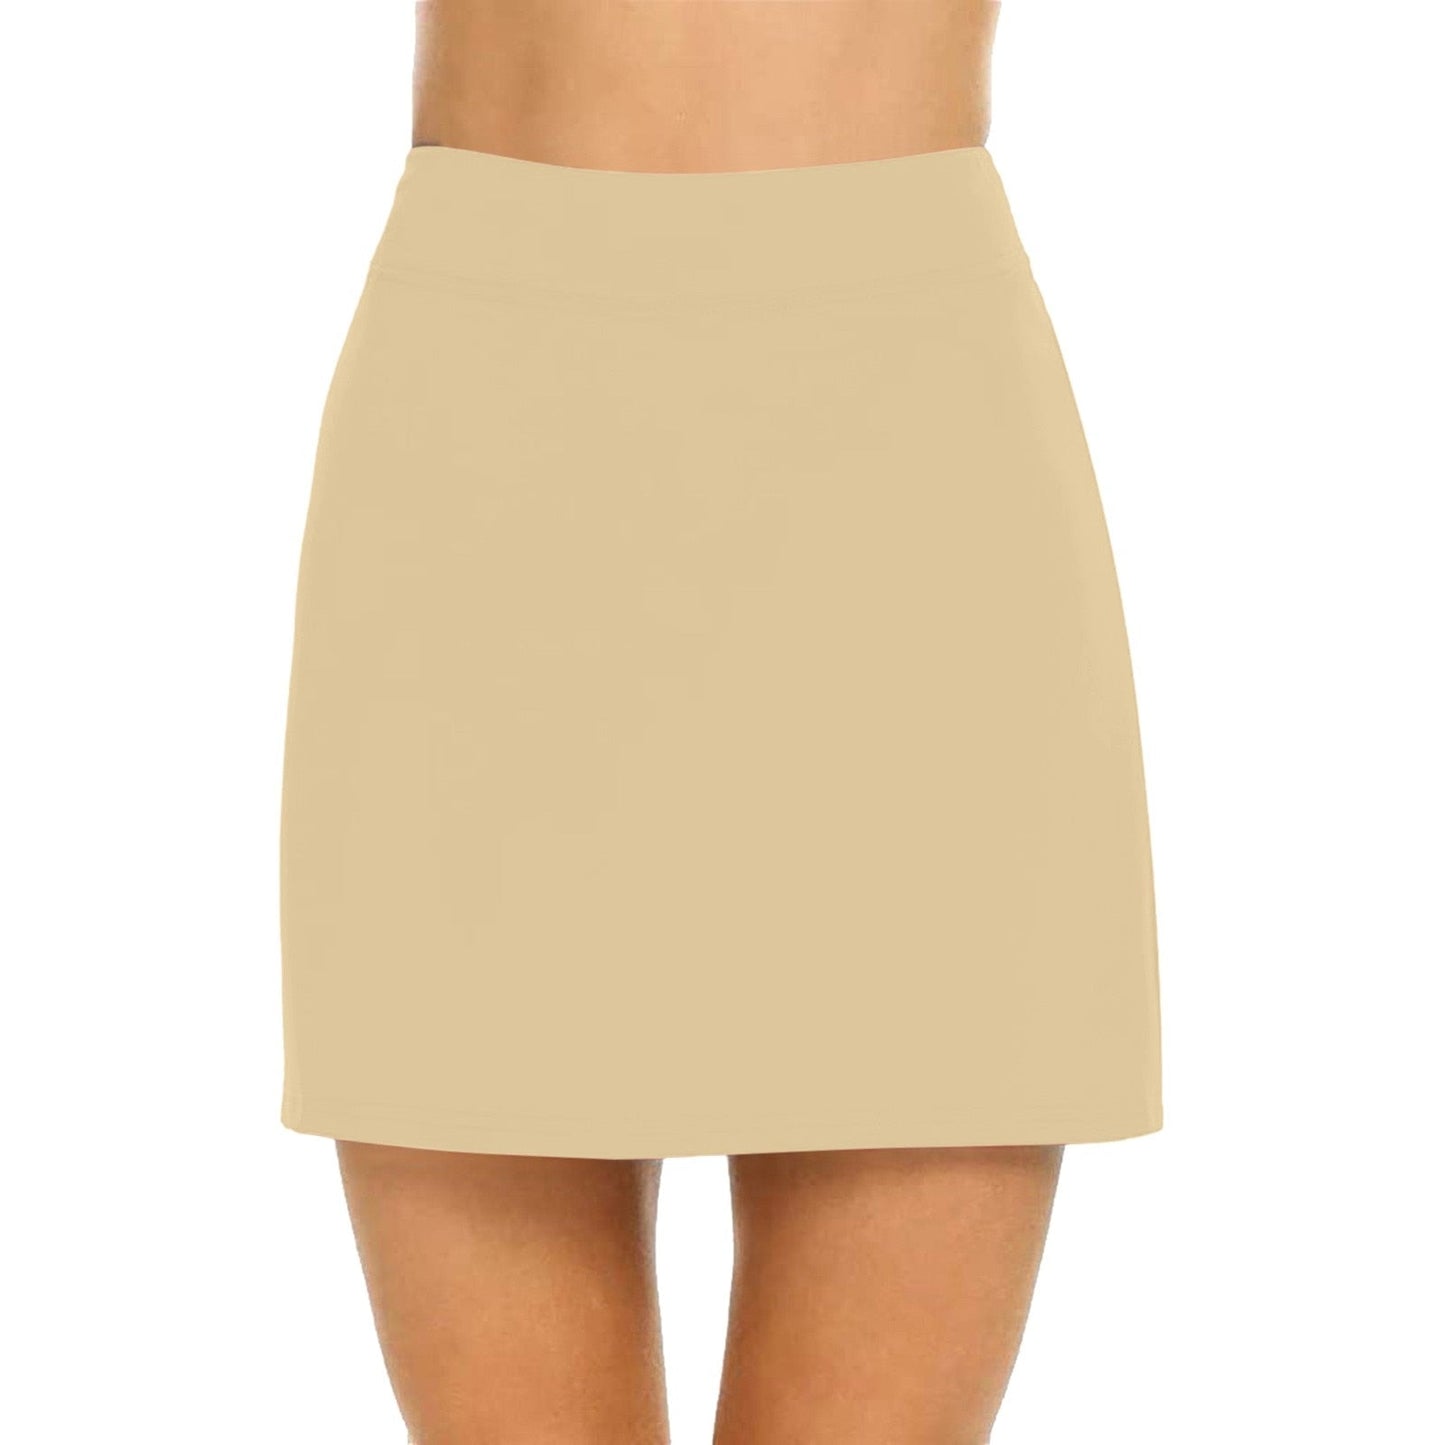 Breathable Solid Color Yoga Short Skirt